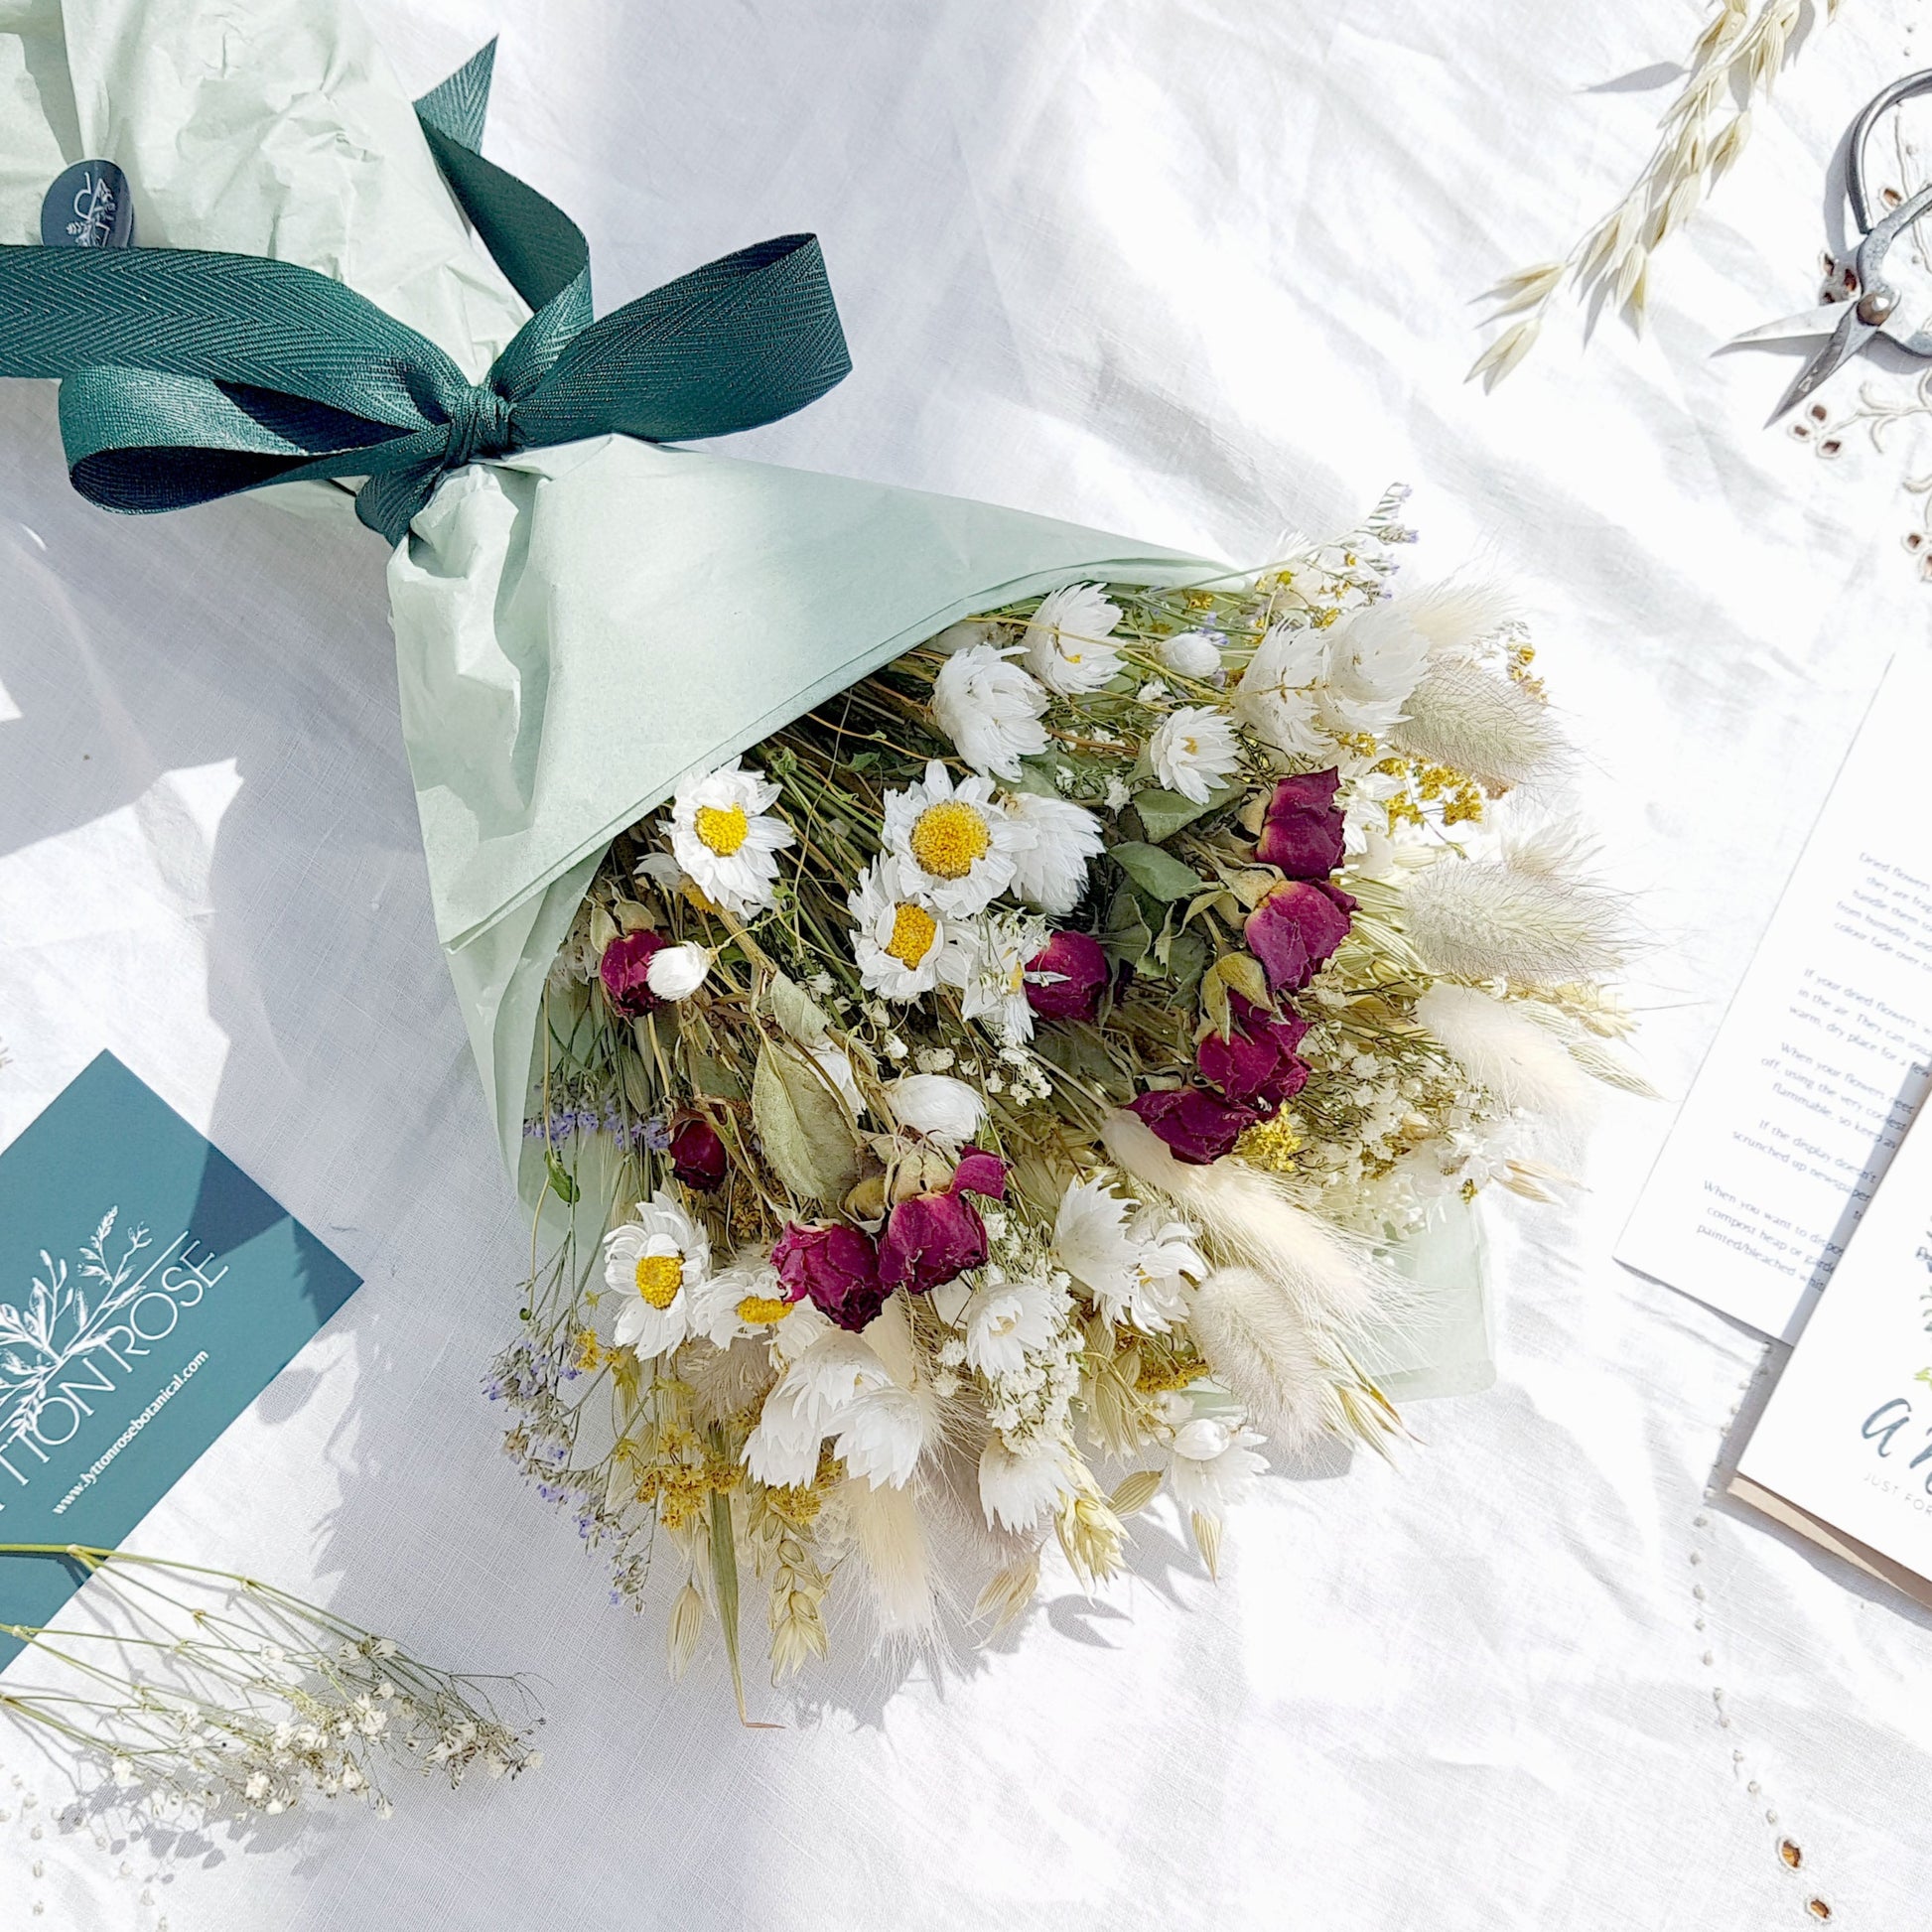 A dried flower bouquet wrapped in tissue is laid on a white linen cloth. It has small red roses, white daisies with yellow centres, lilac sea lavender and pretty white gypsophila among other grasses and fillers. In the background you can see the optional gift card and instructions for caring for dried flowers.